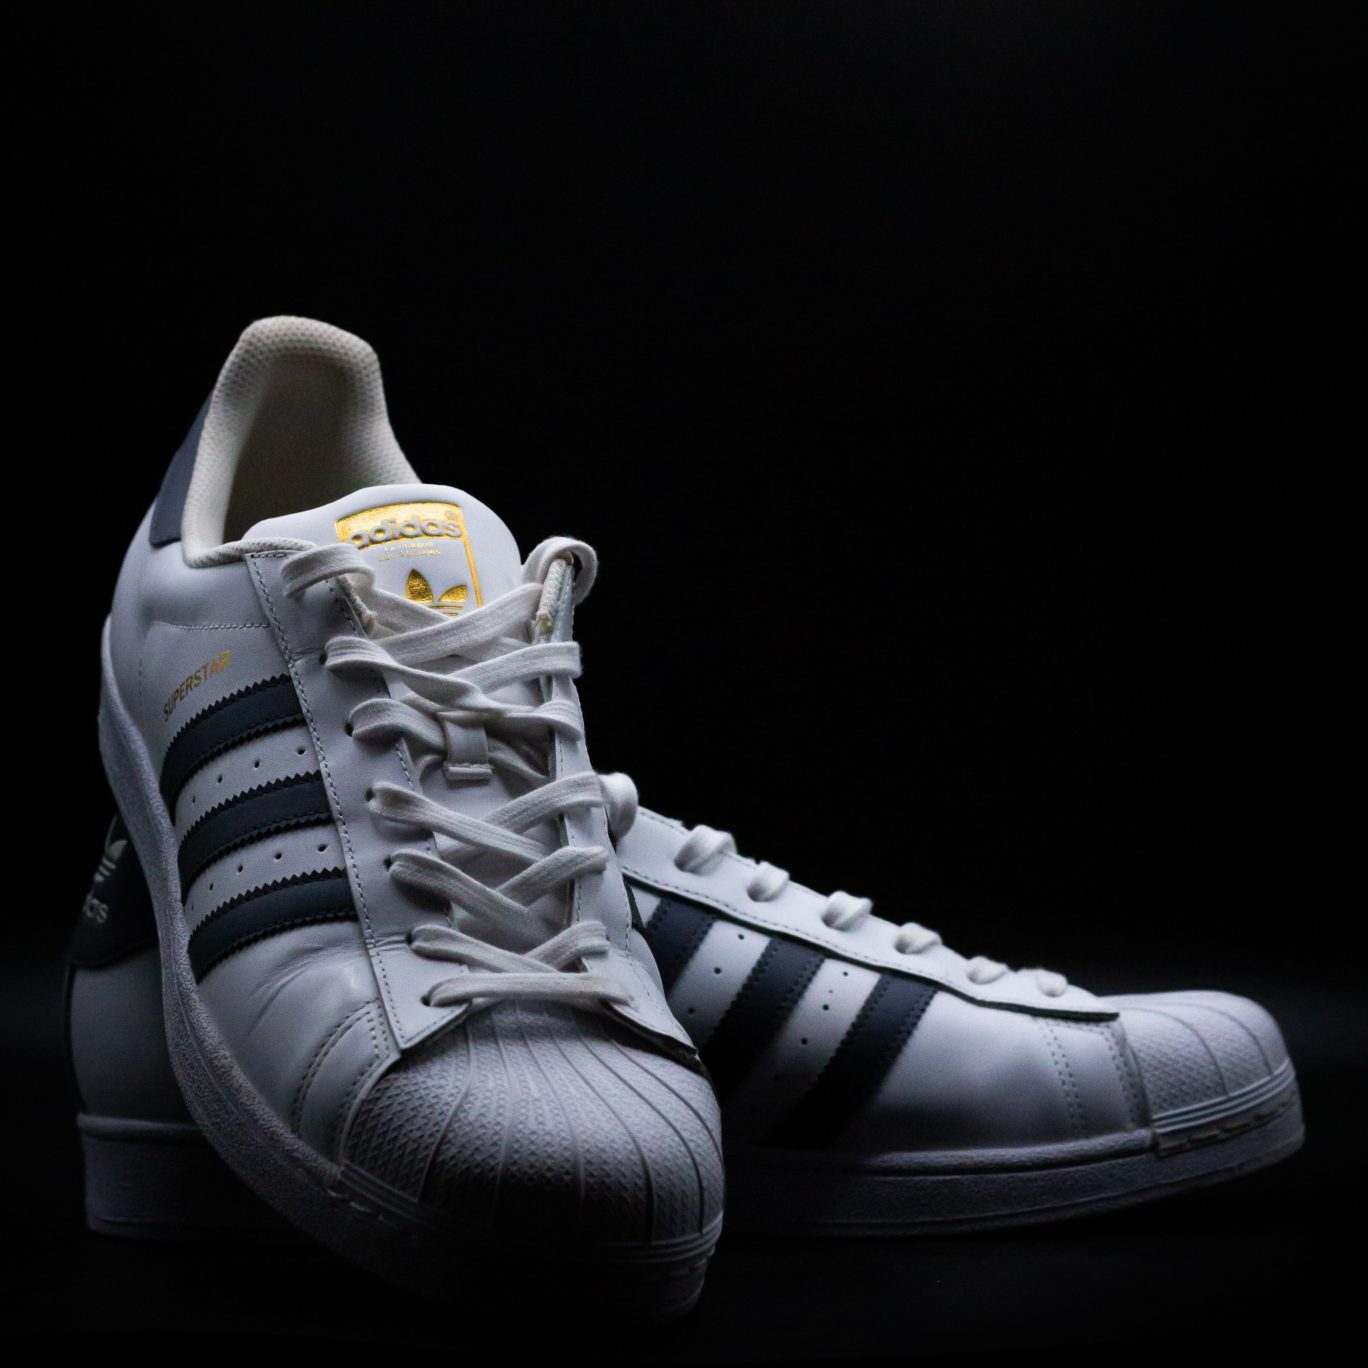 Adidas on the hunt for stripes | Adidas vs. Thom Browne | Blog Chiever